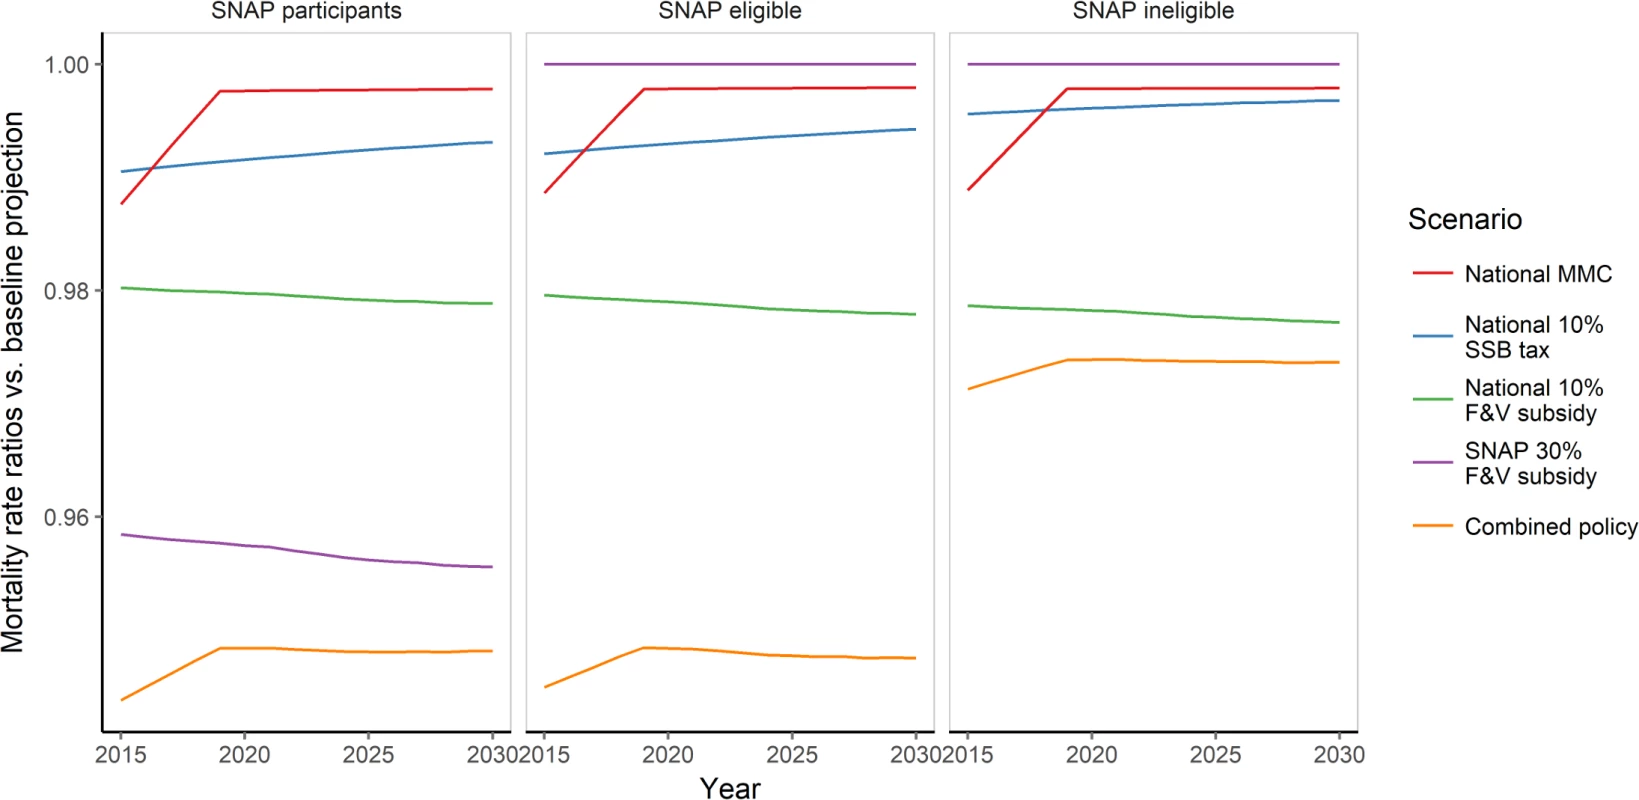 Standardised cardiovascular disease mortality rate ratio of each policy scenario versus baseline projection (reference) from 2015 to 2030 by SNAP group.